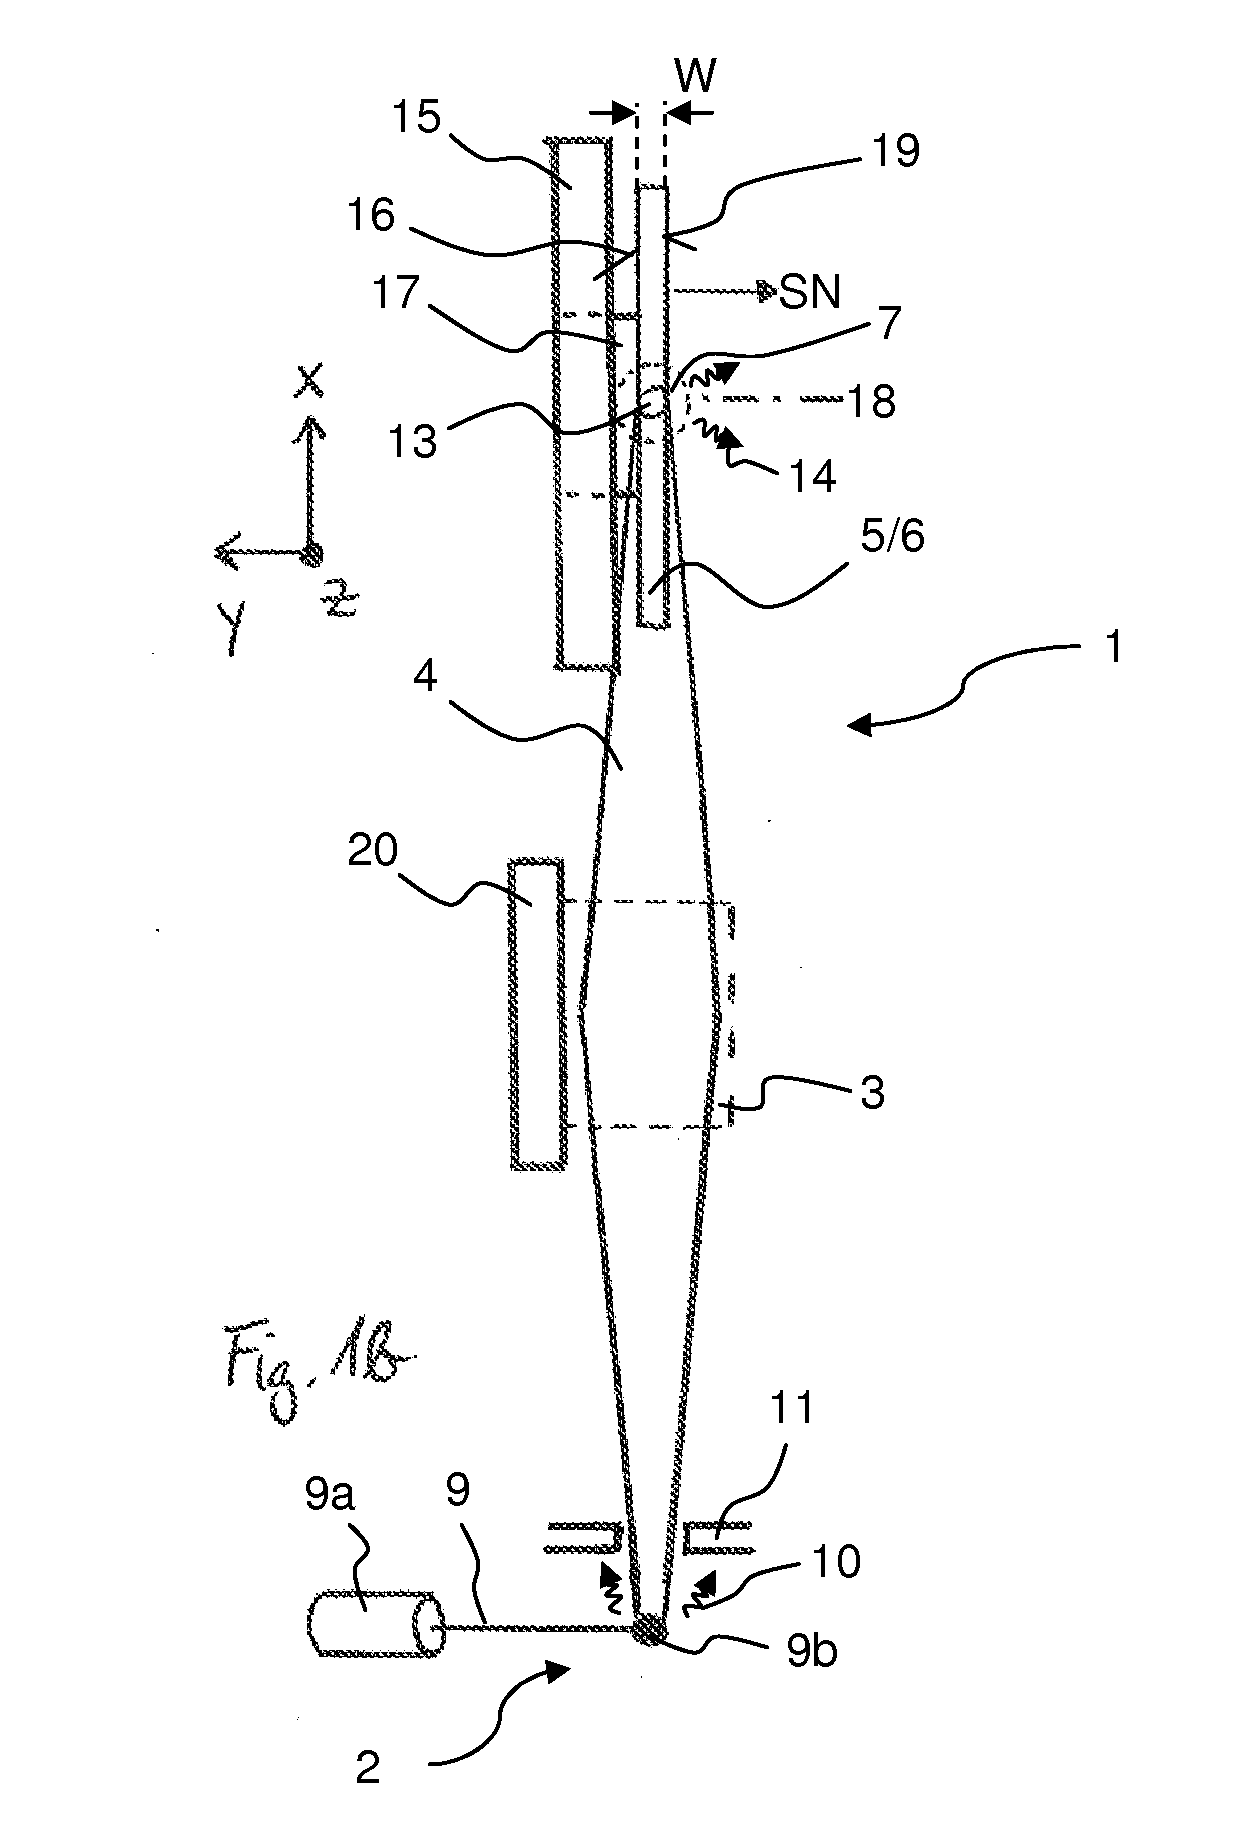 XRF measurement apparatus for detecting contaminations on the bevel of a wafer